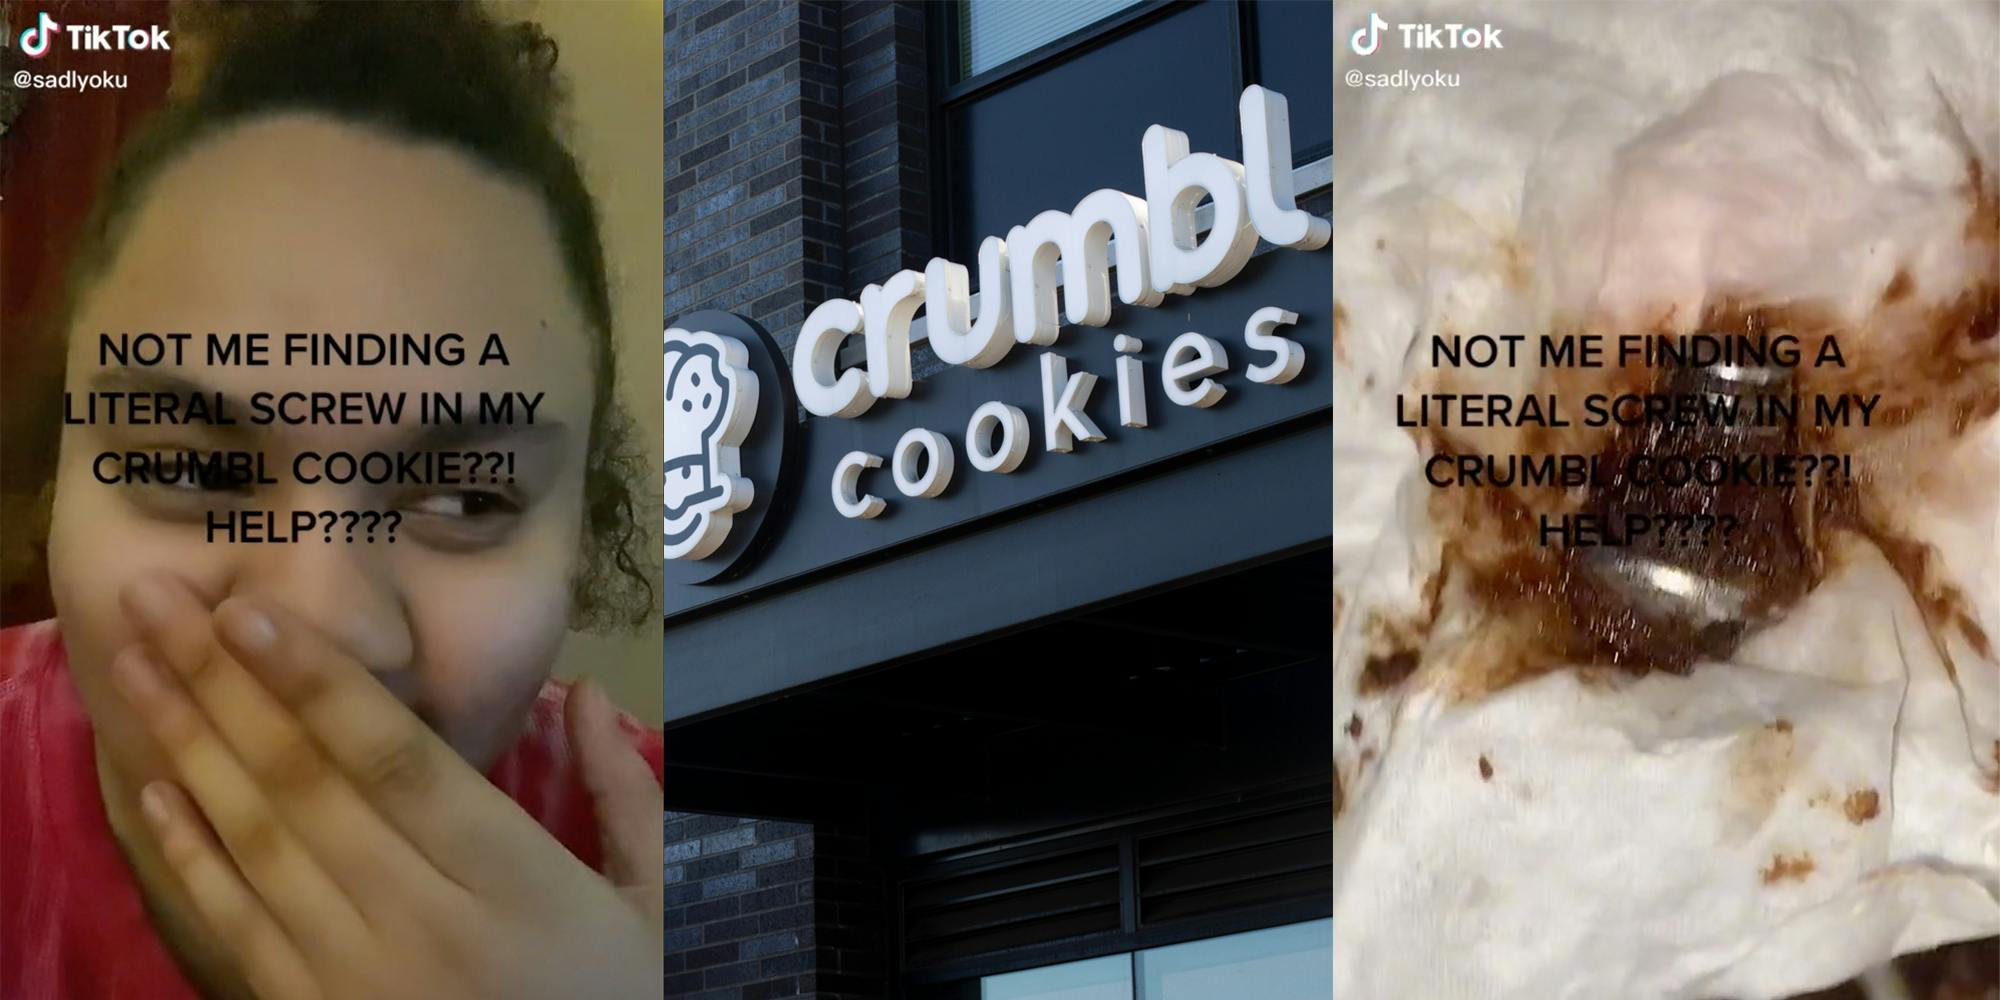 TikToker says they found screw in Crumbl cookie.